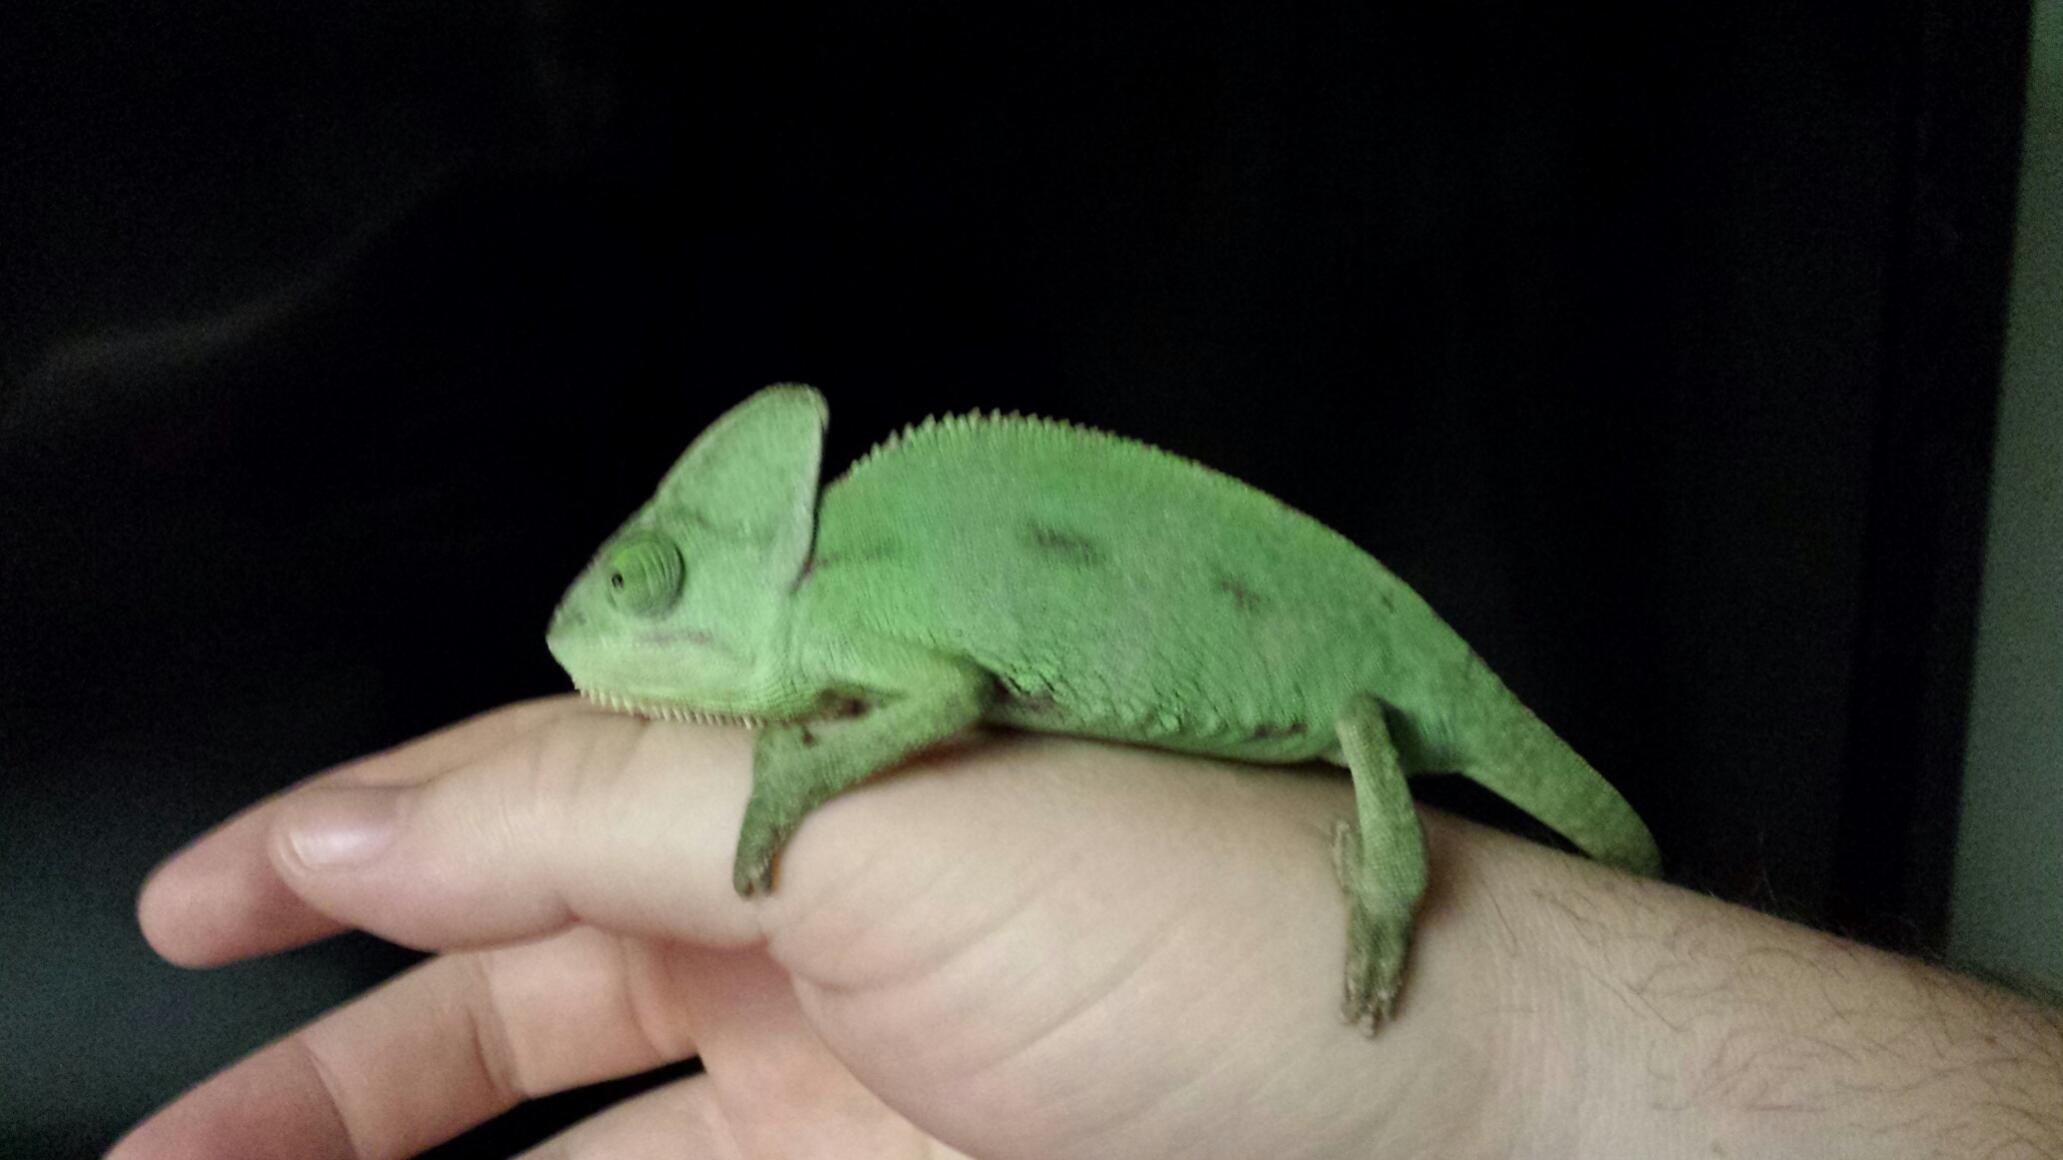 Is a chameleon a good first reptile?